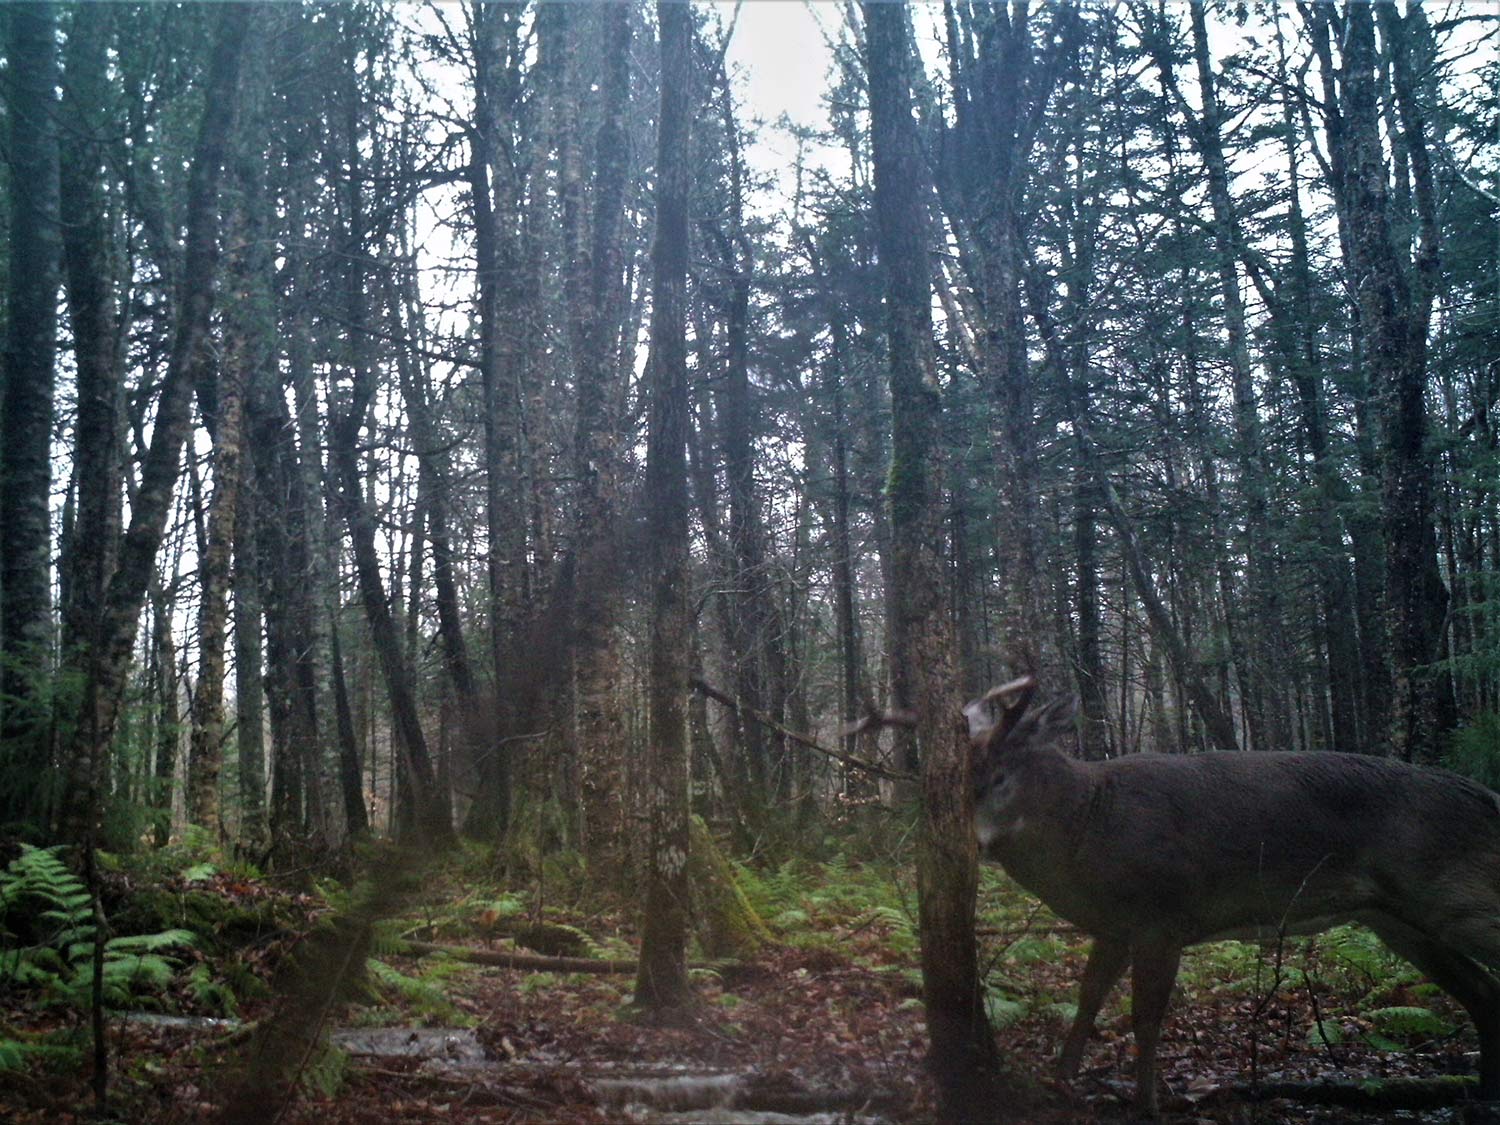 trail cam photo of a deer rubbing against a tree